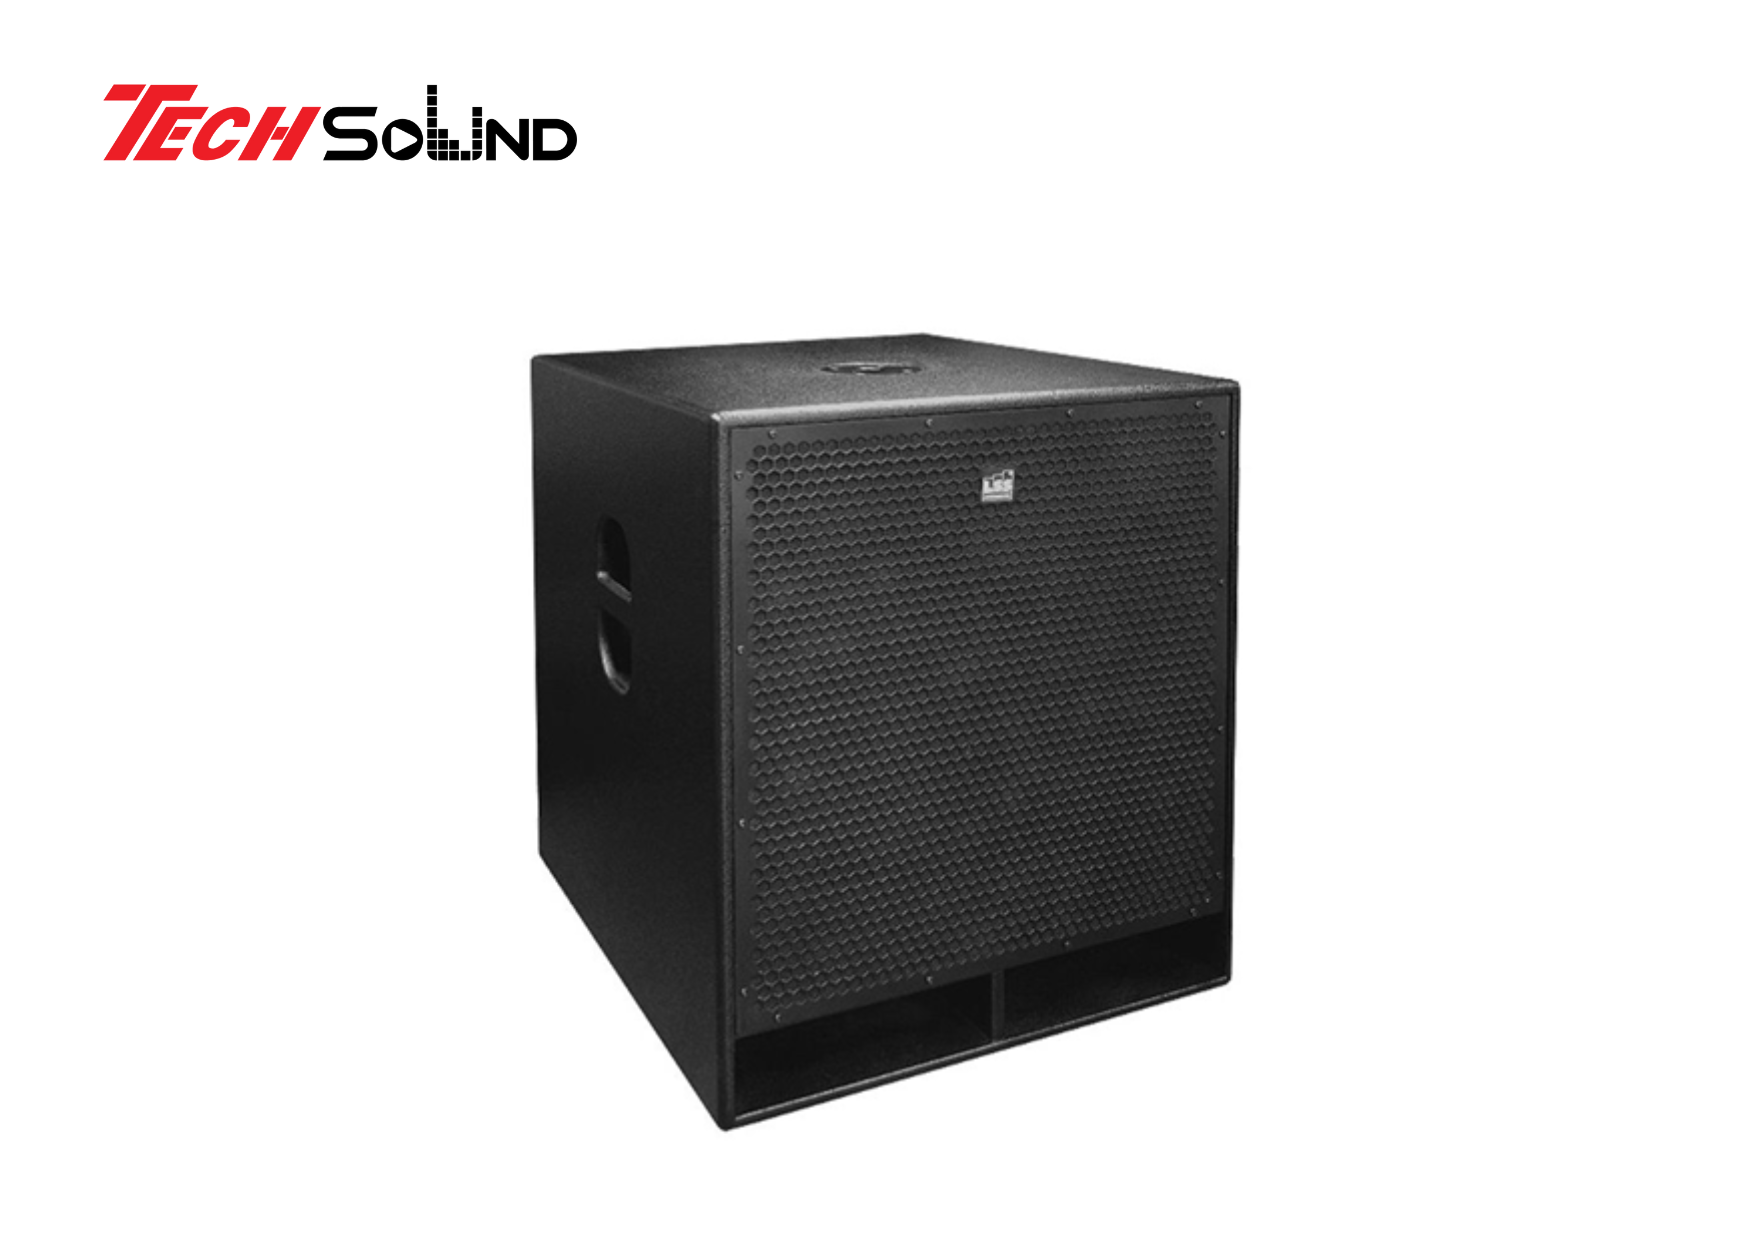 hinh anh loa subwoofer lss dg118